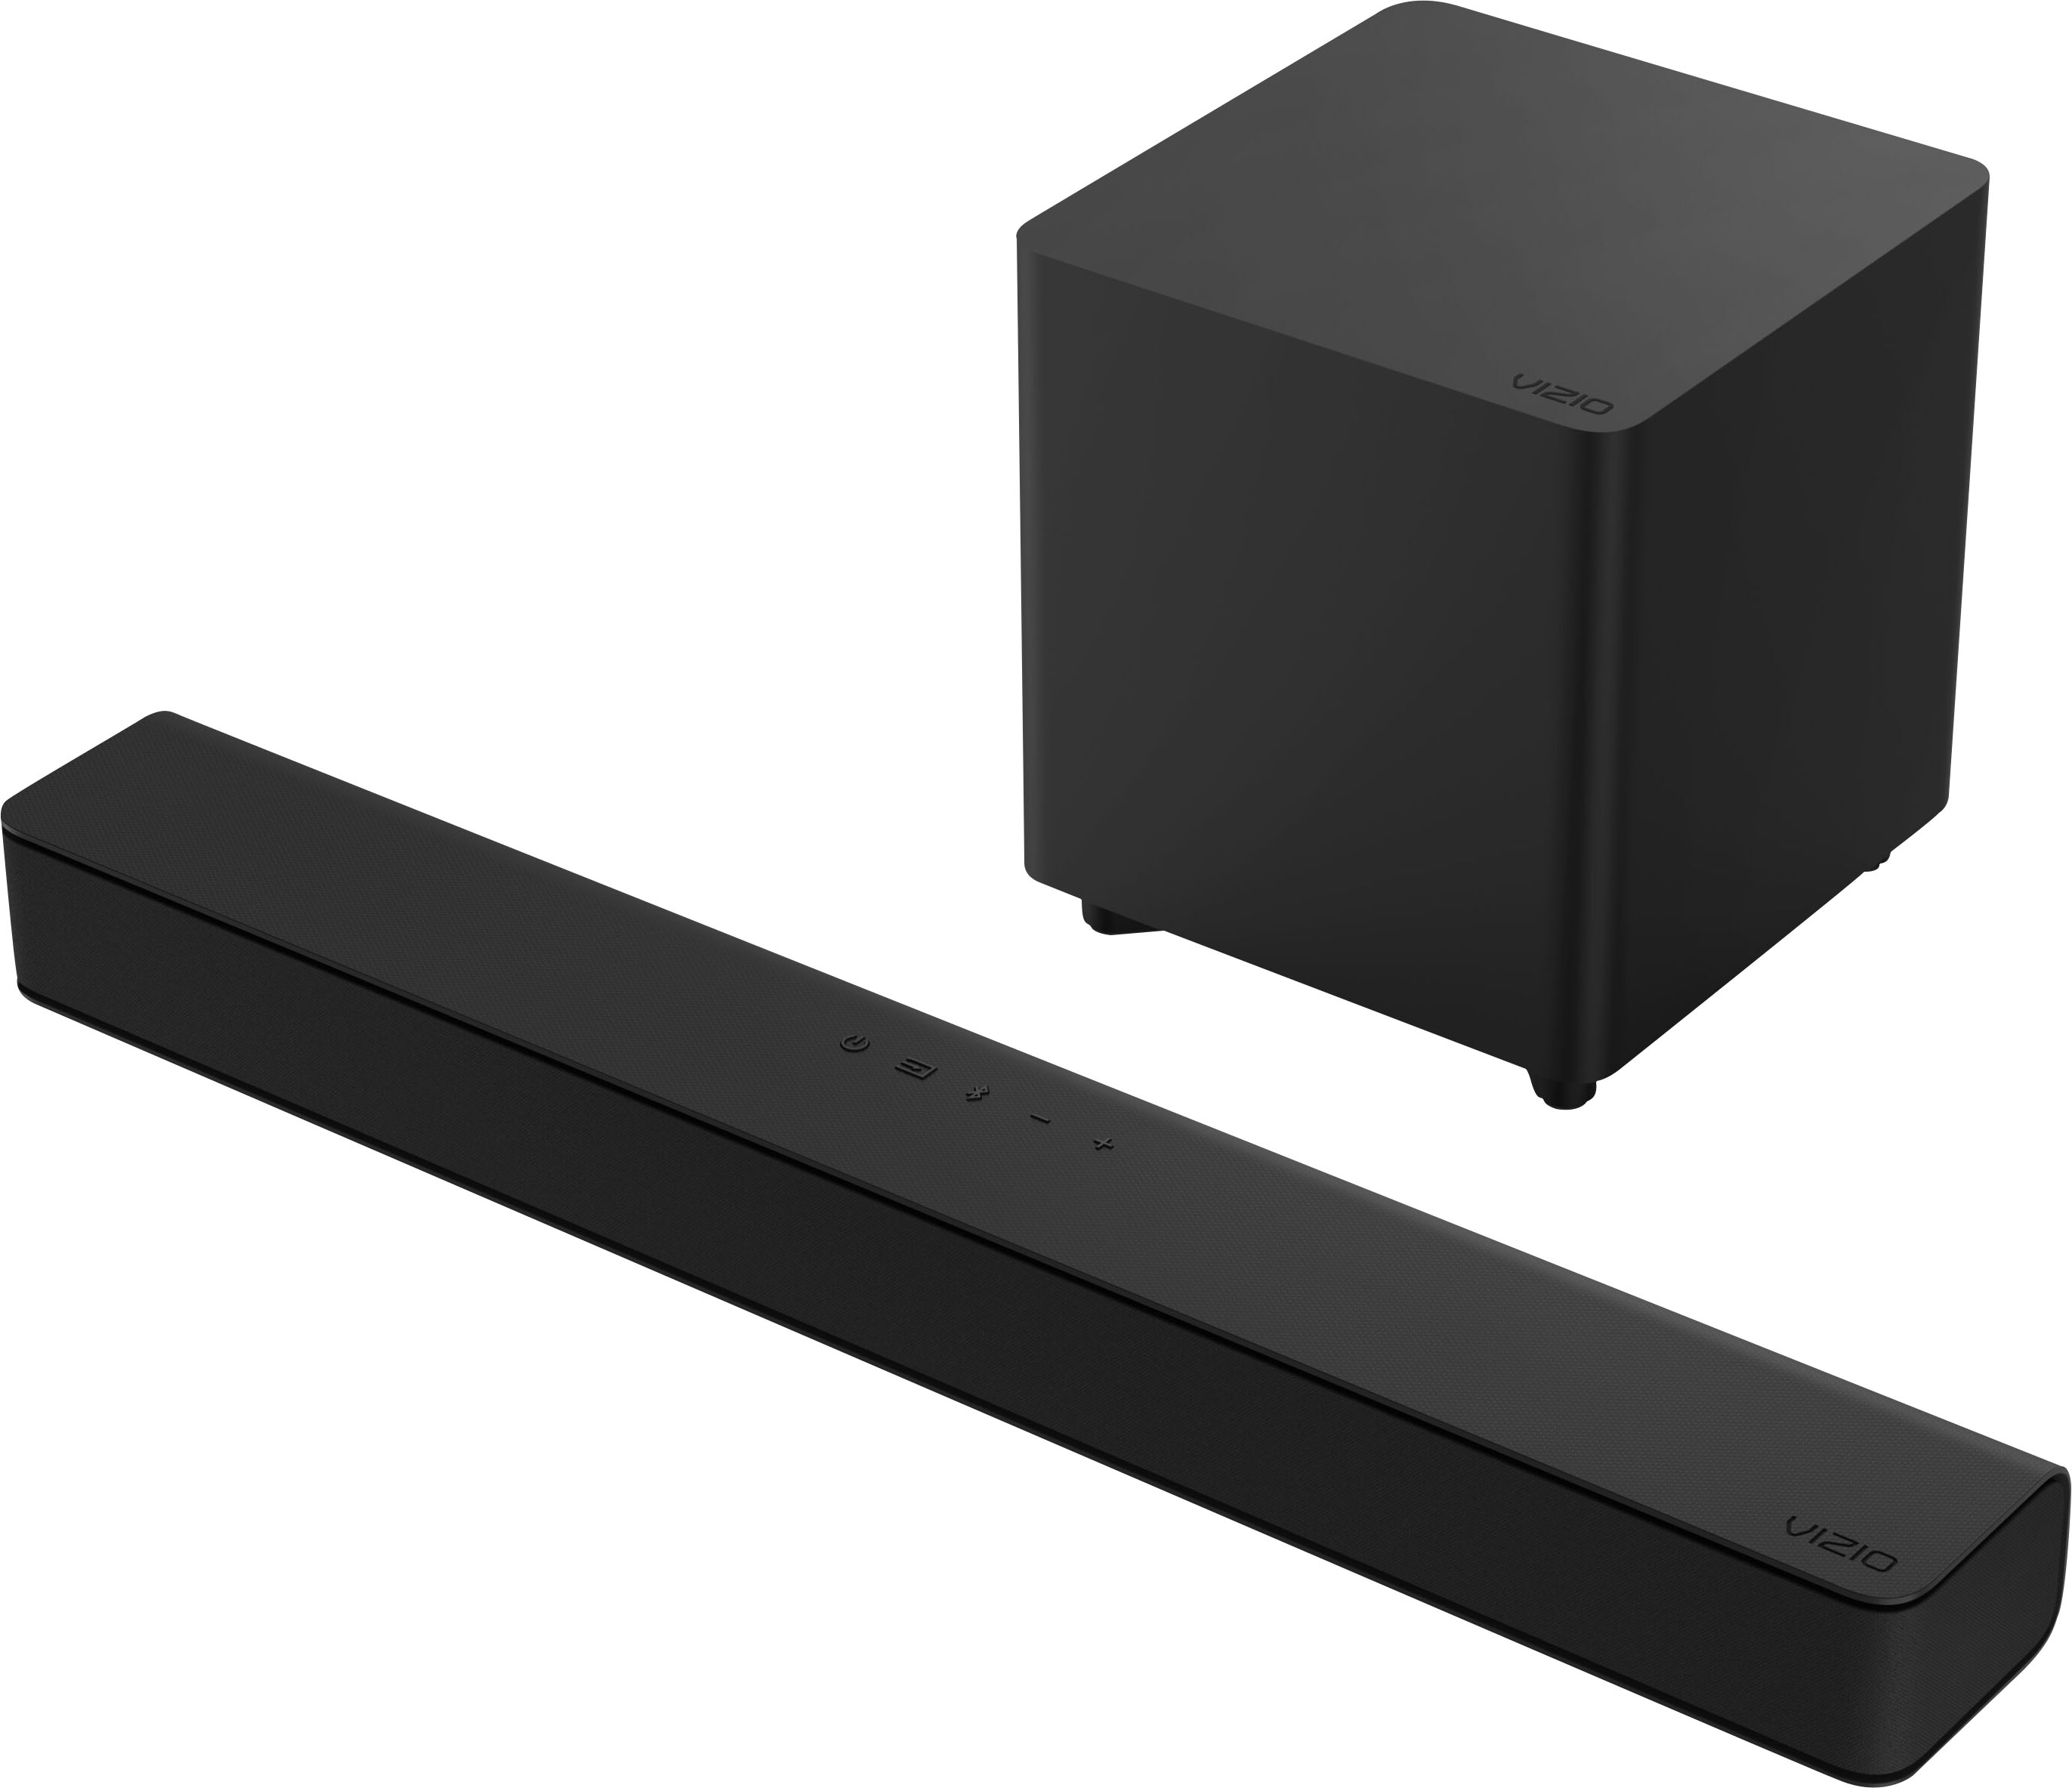 Angle View: VIZIO - 2.1-Channel V-Series Home Theater Sound Bar with DTS Virtual:X and Wireless Subwoofer - Black